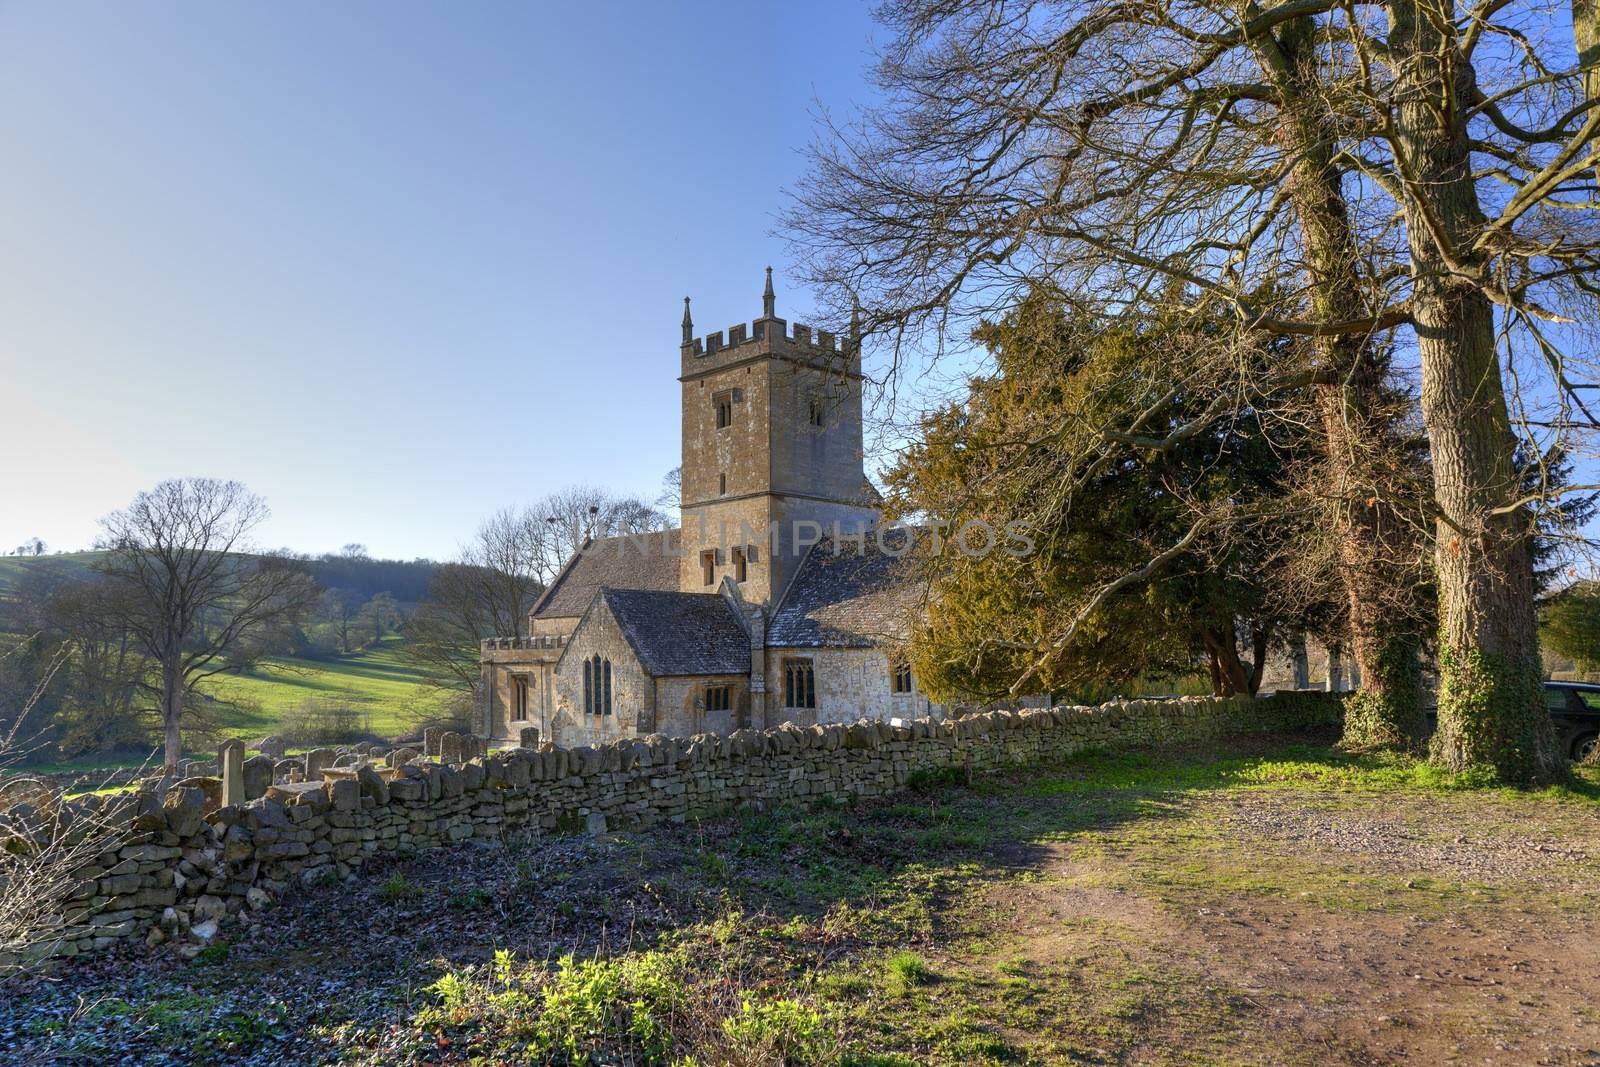 Cotswold church in winter, Gloucestershire, England.